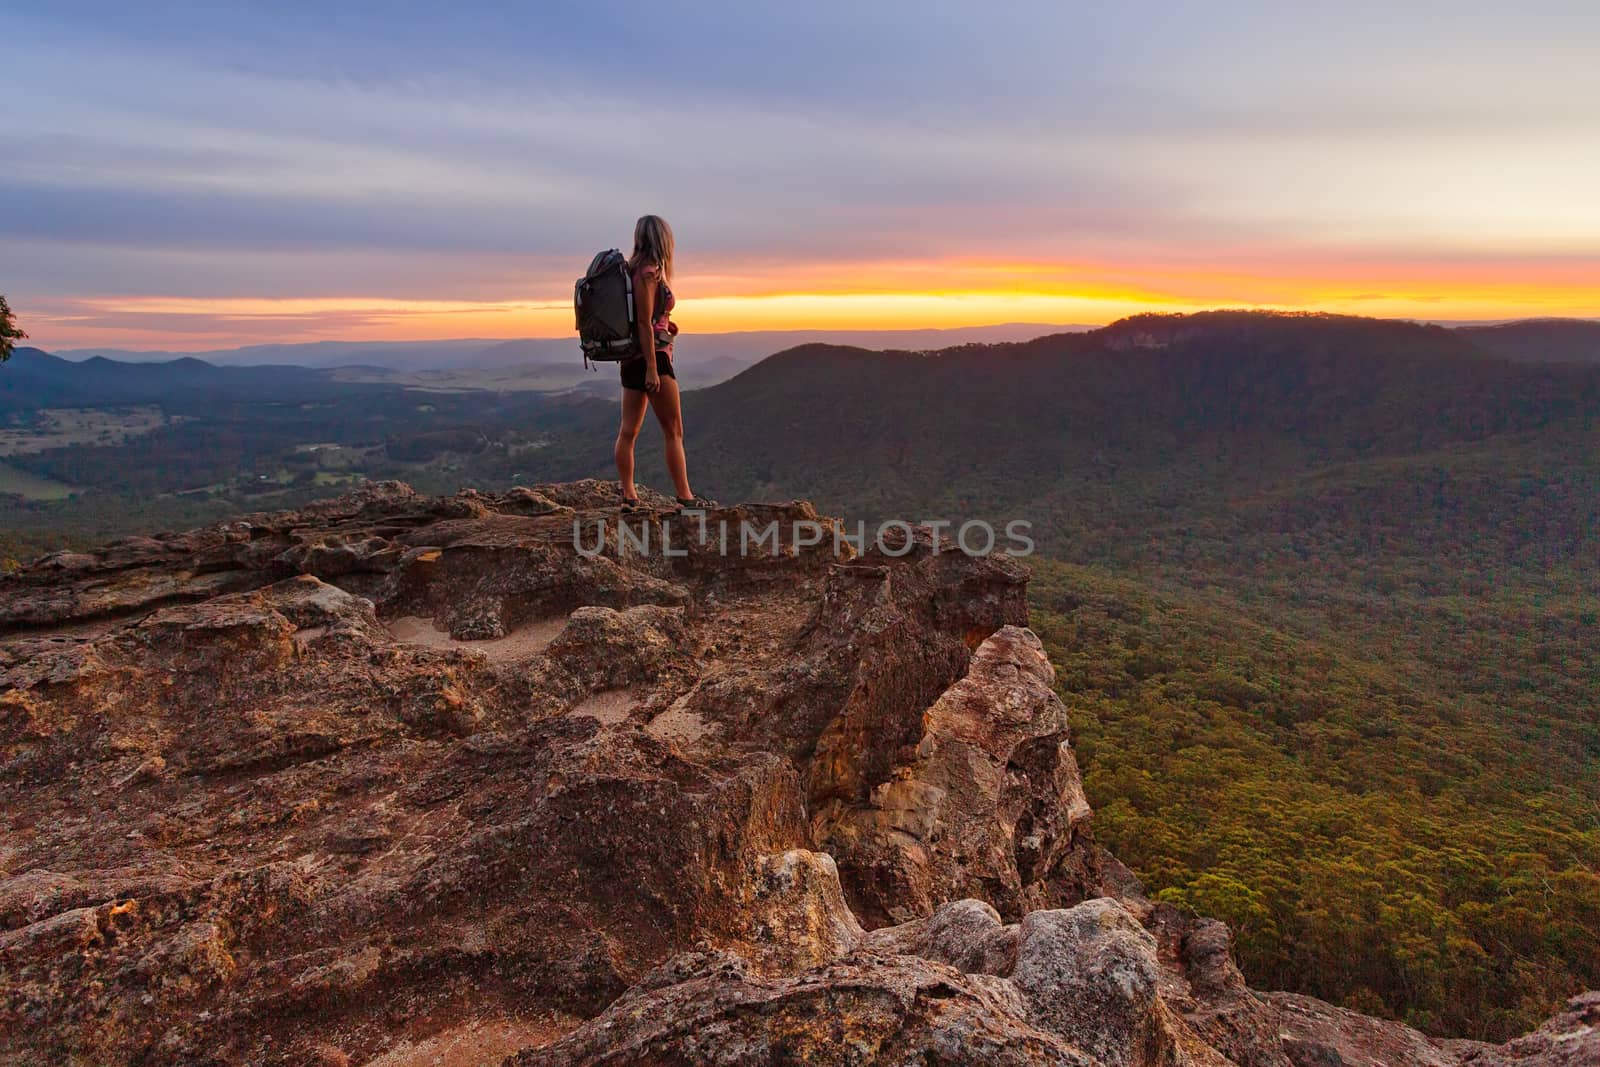 Hiker watching the last light  and fiery sunset colours fade as she watches lingering on with hope it will not end, but alas dusk and night will be swiftly upon her and the surrounding landscape of mountains and valleys